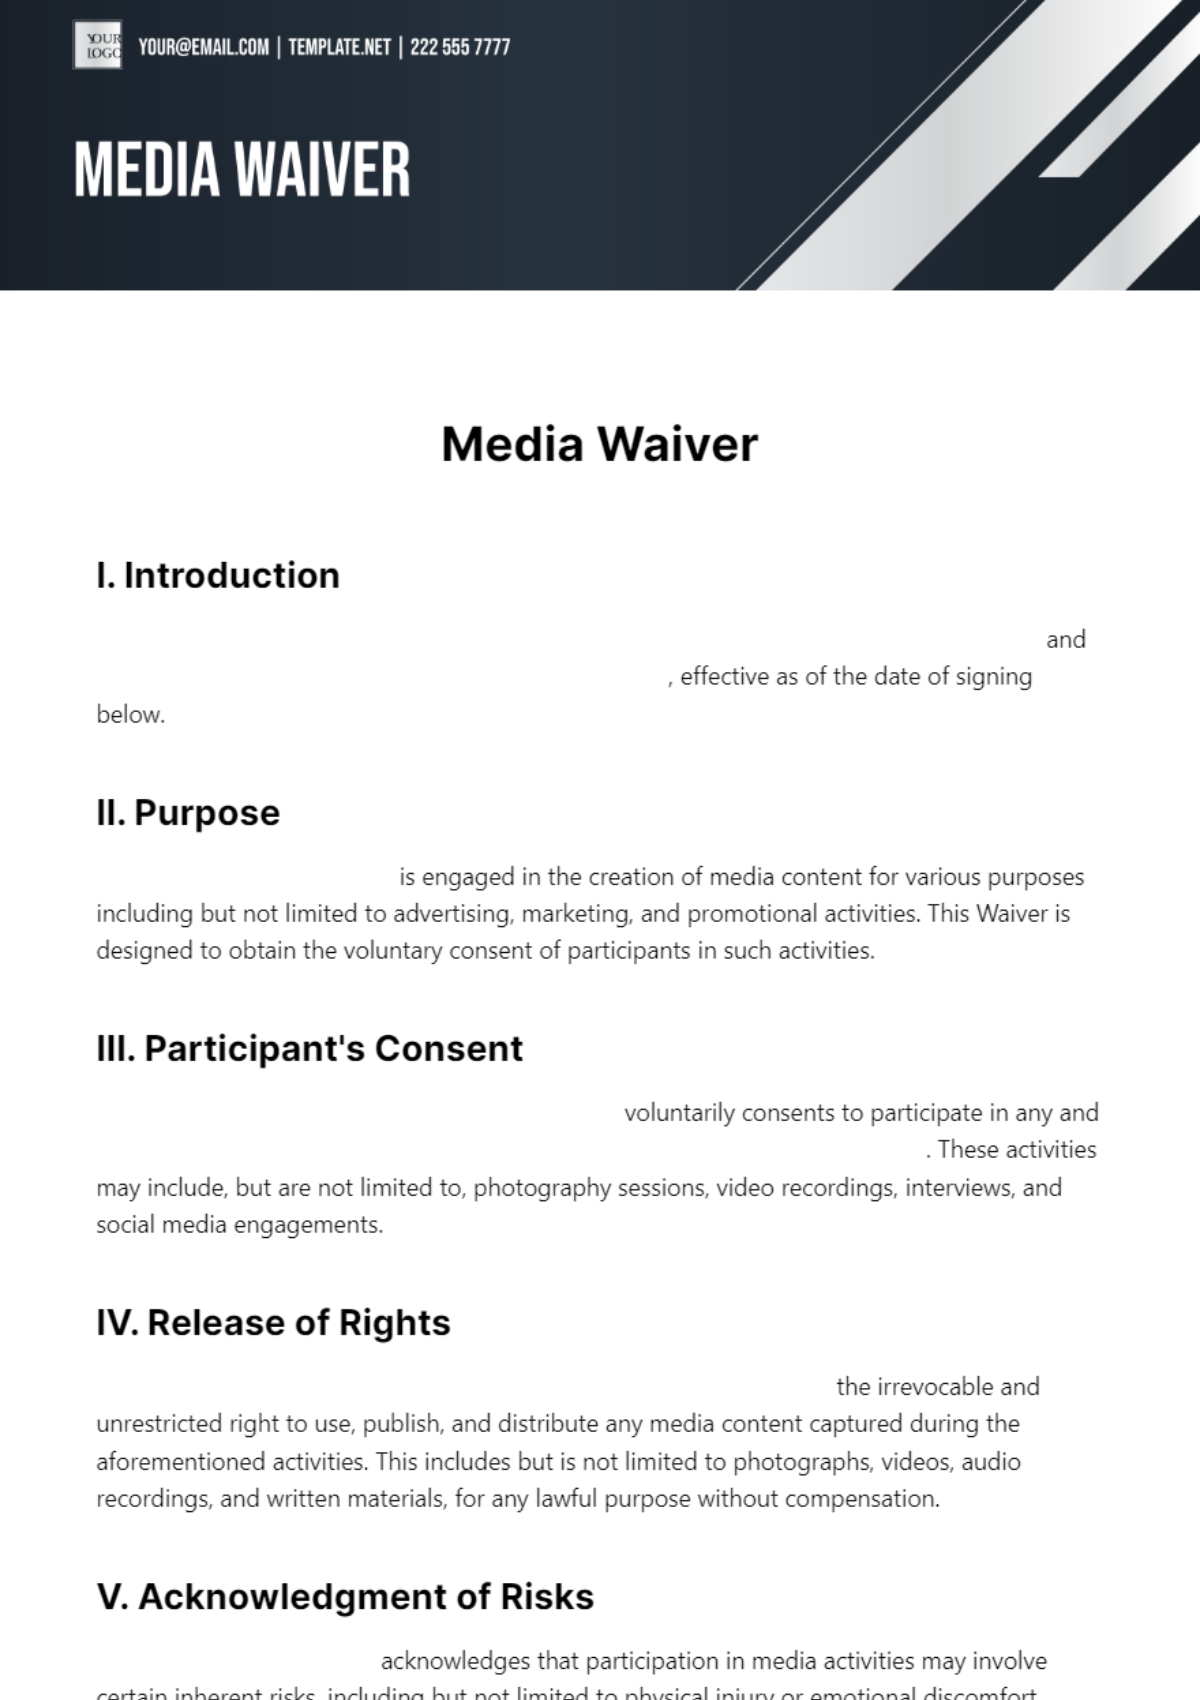 Media Waiver Template